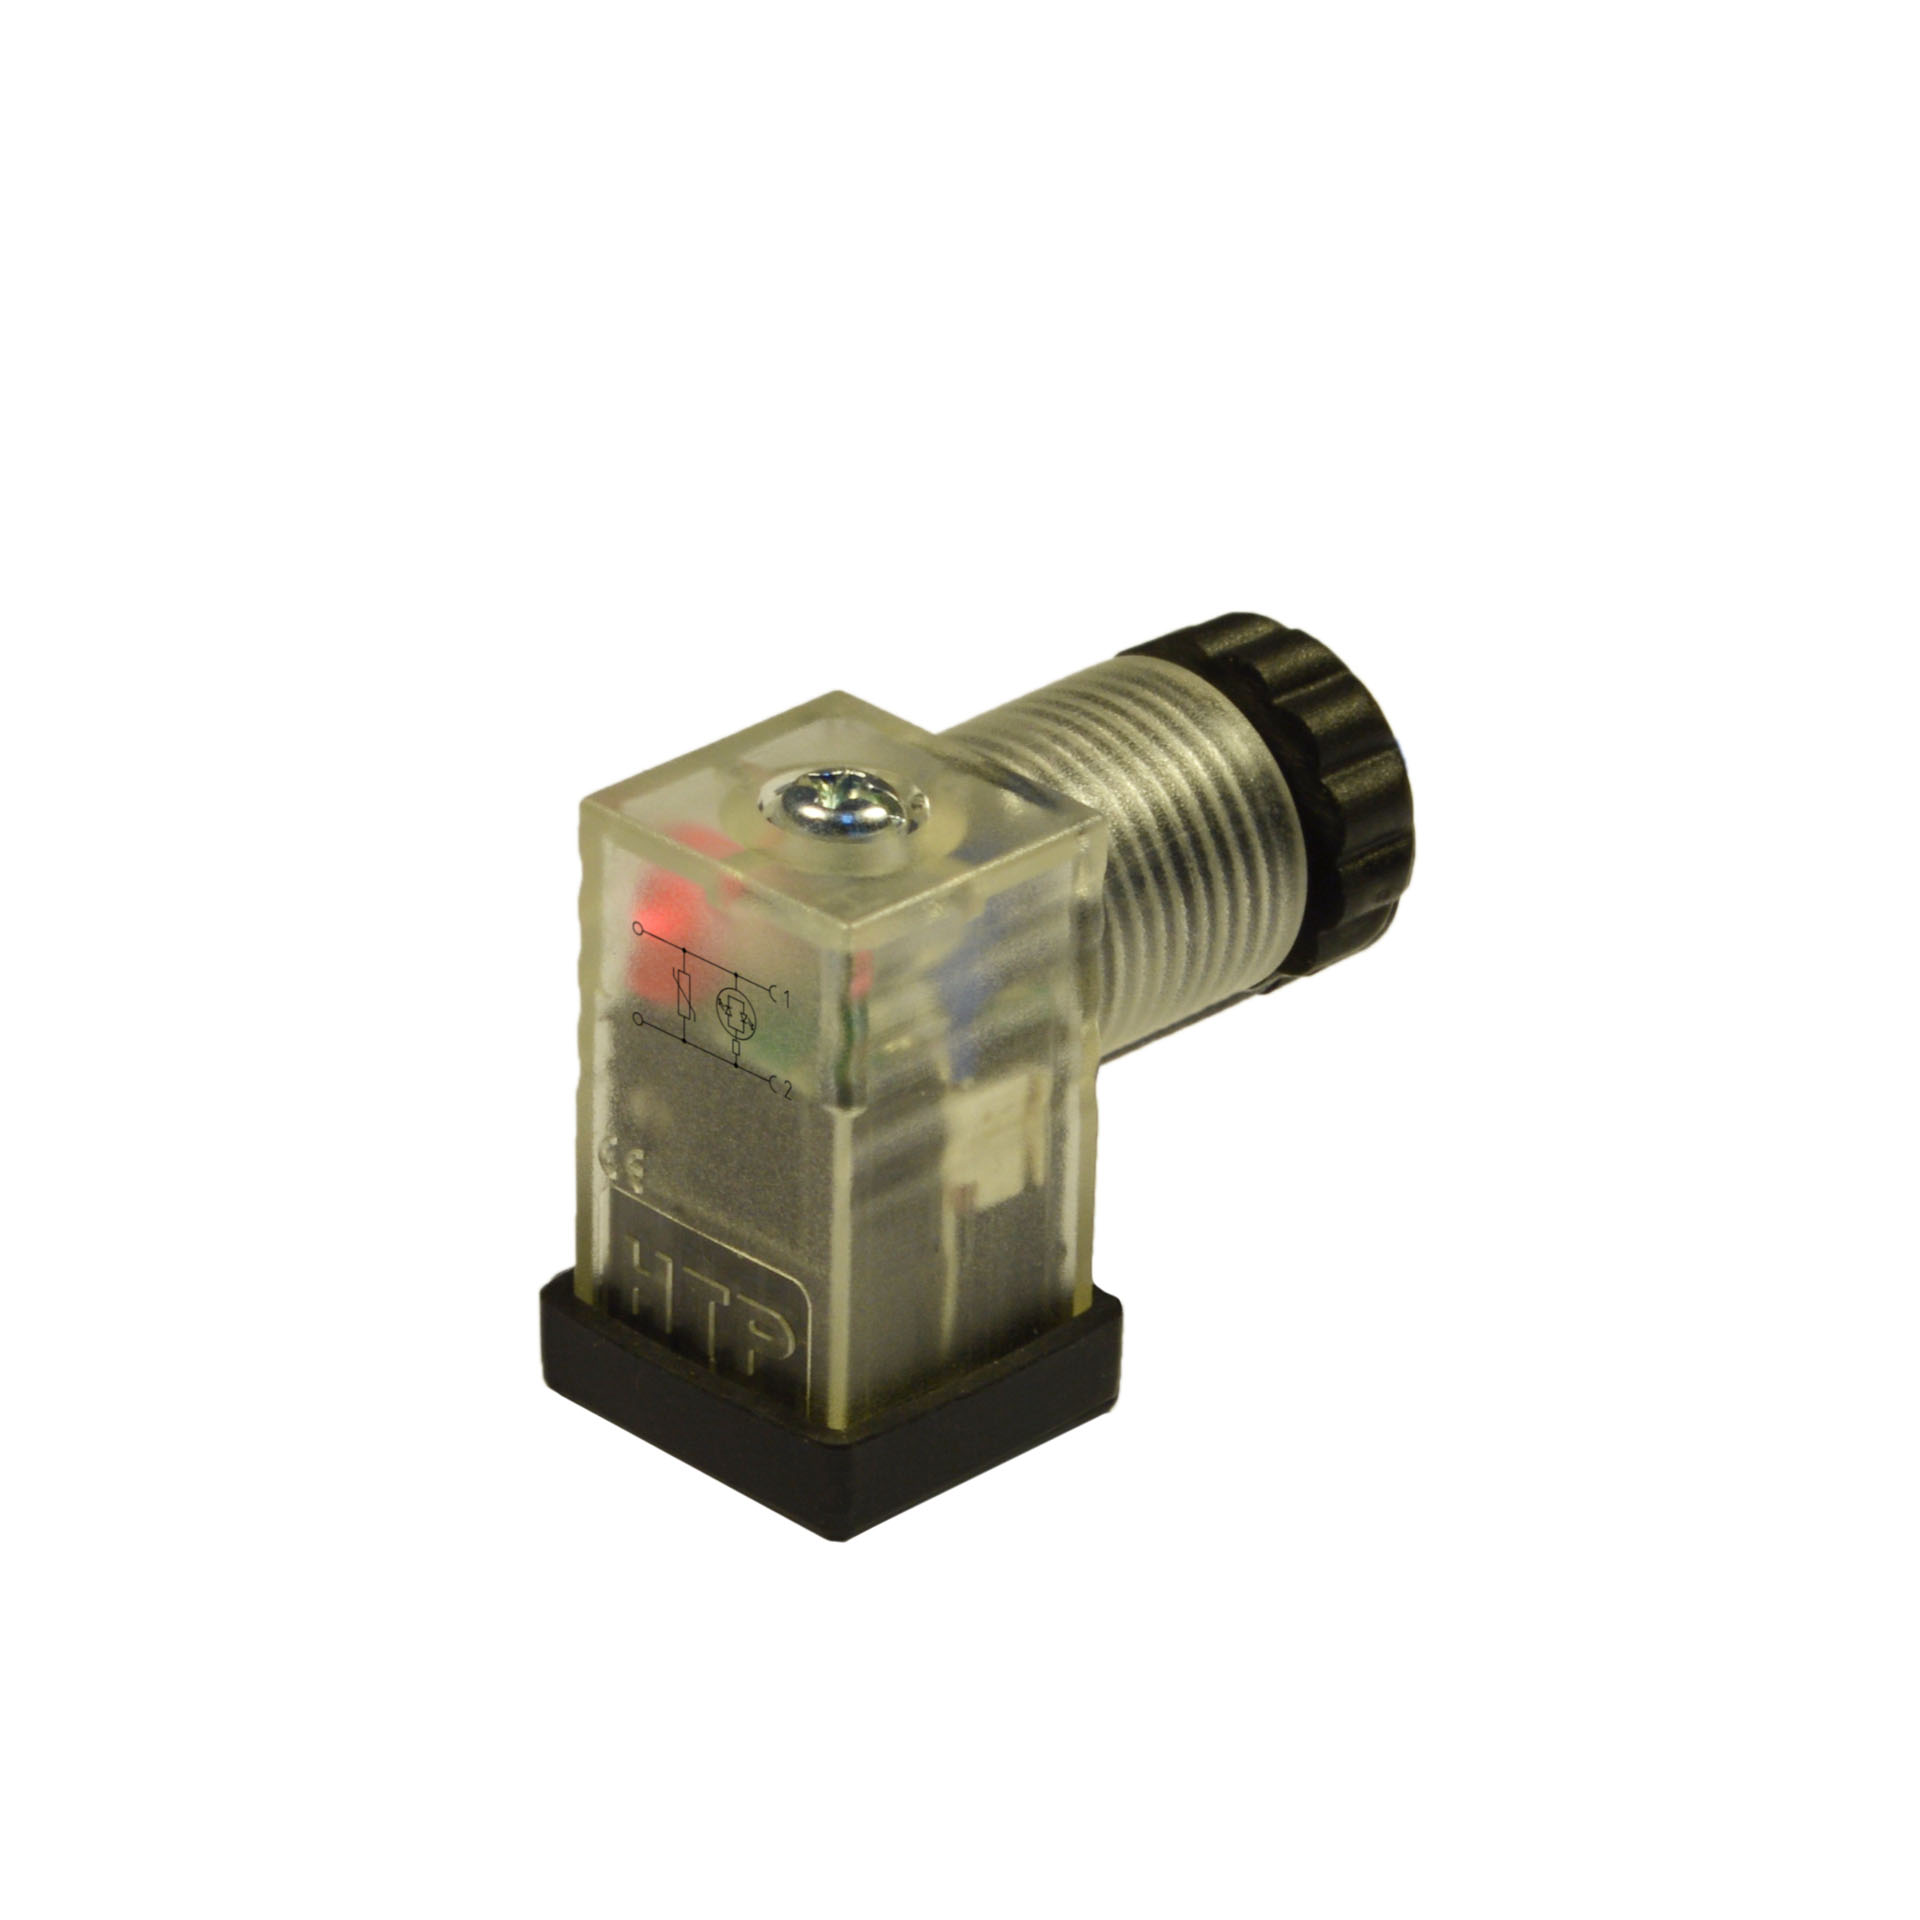 Industrial standard(typeC)field attachable,2p+PE(h.6),red LED+vdr,230VAC/DC,PG7